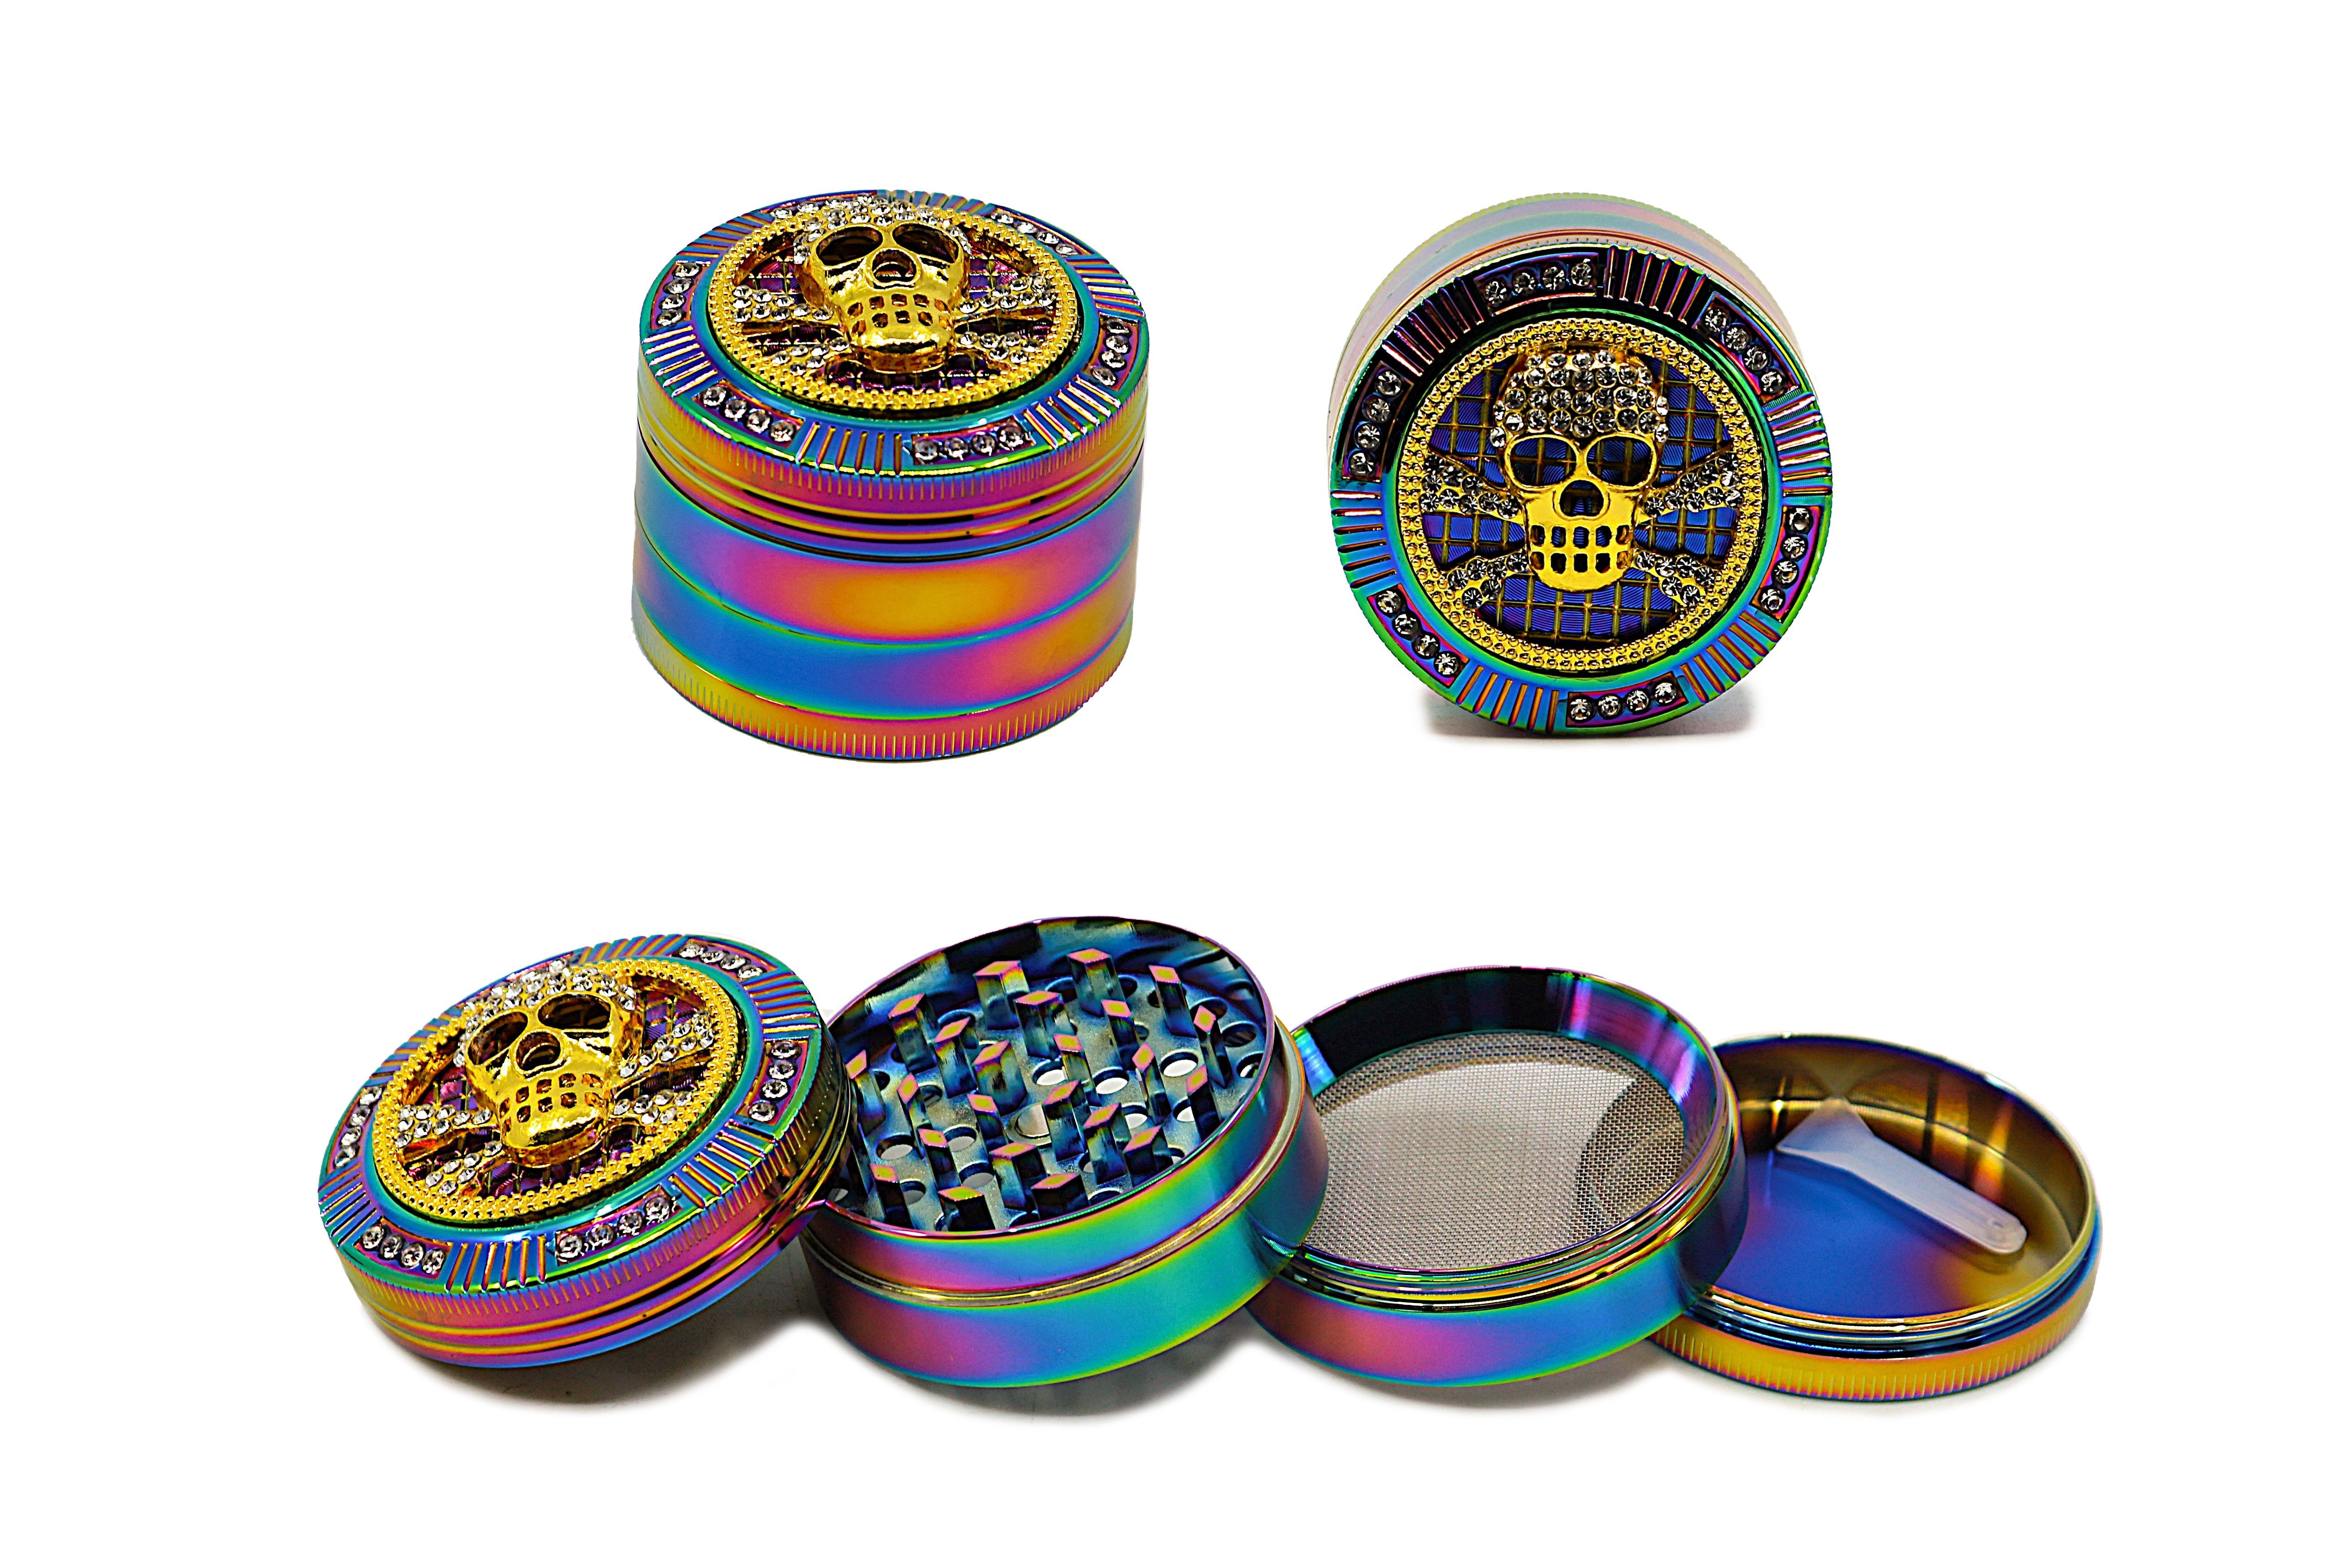 Rainbow Bling Grinder - (2.0")(50mm) 4 piece PPPI 